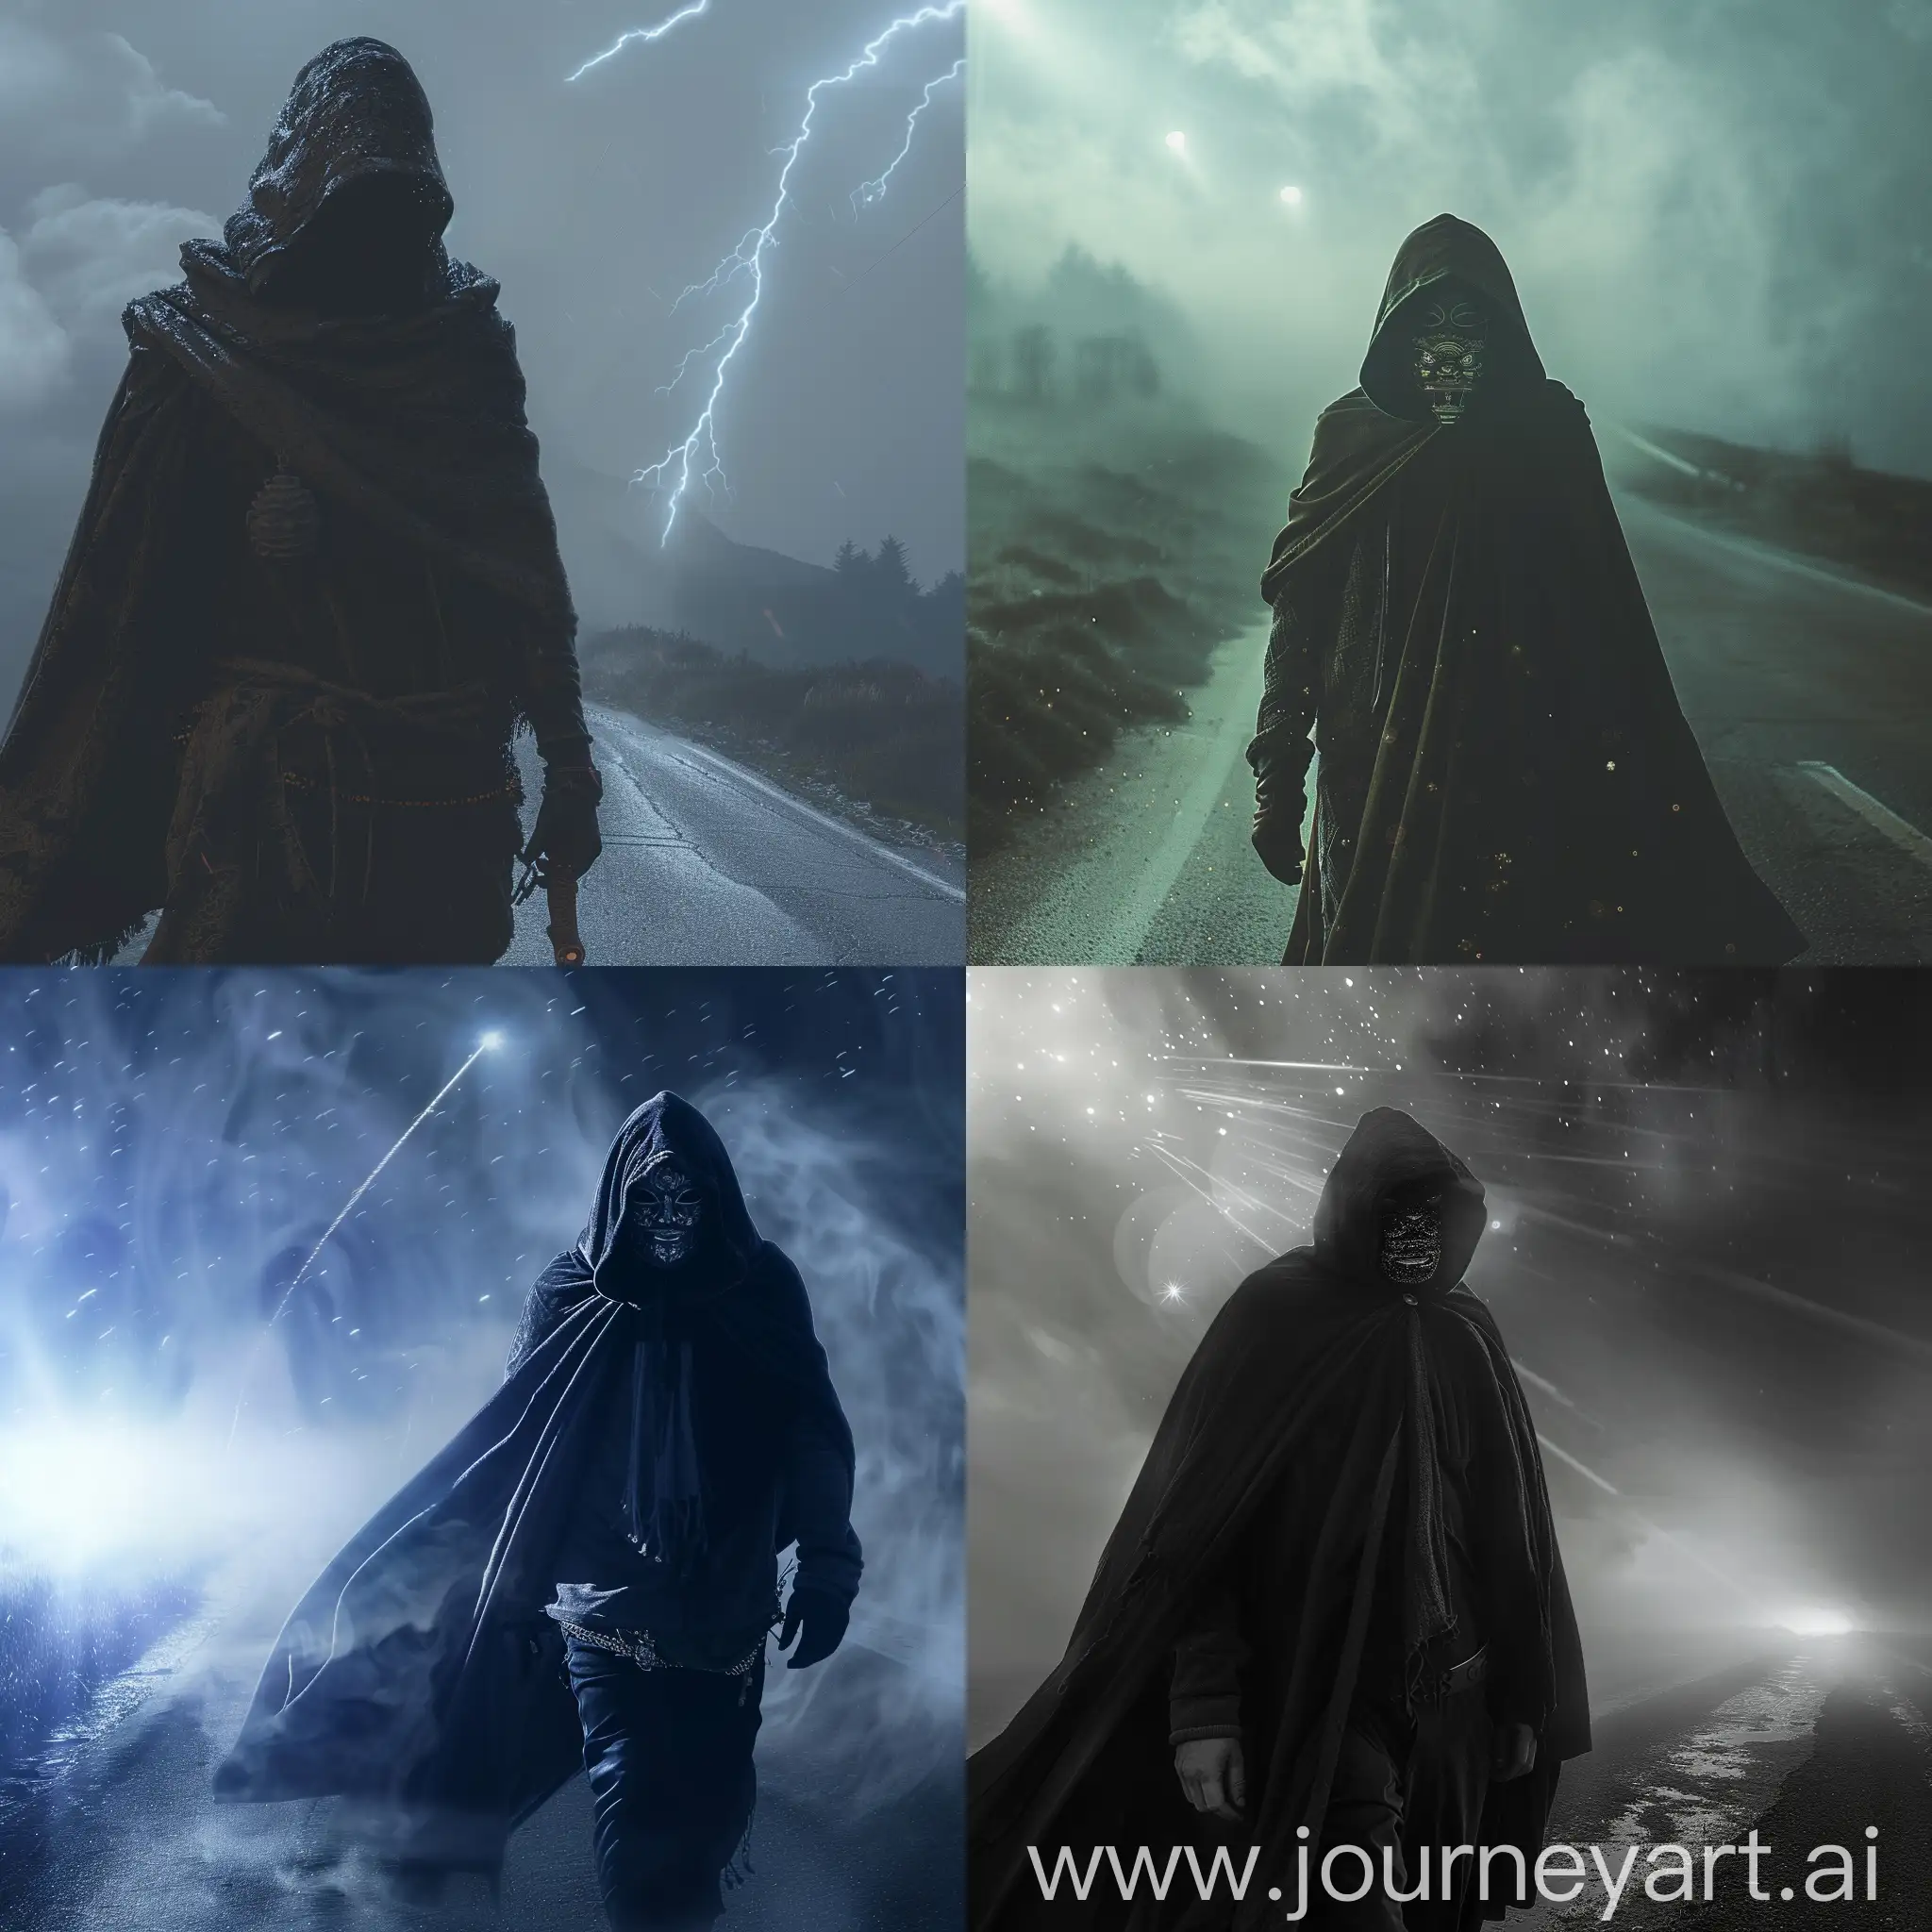 Man with a cape and hood and oriental mask, walking along a foggy road at night, and the sky is flashing light.